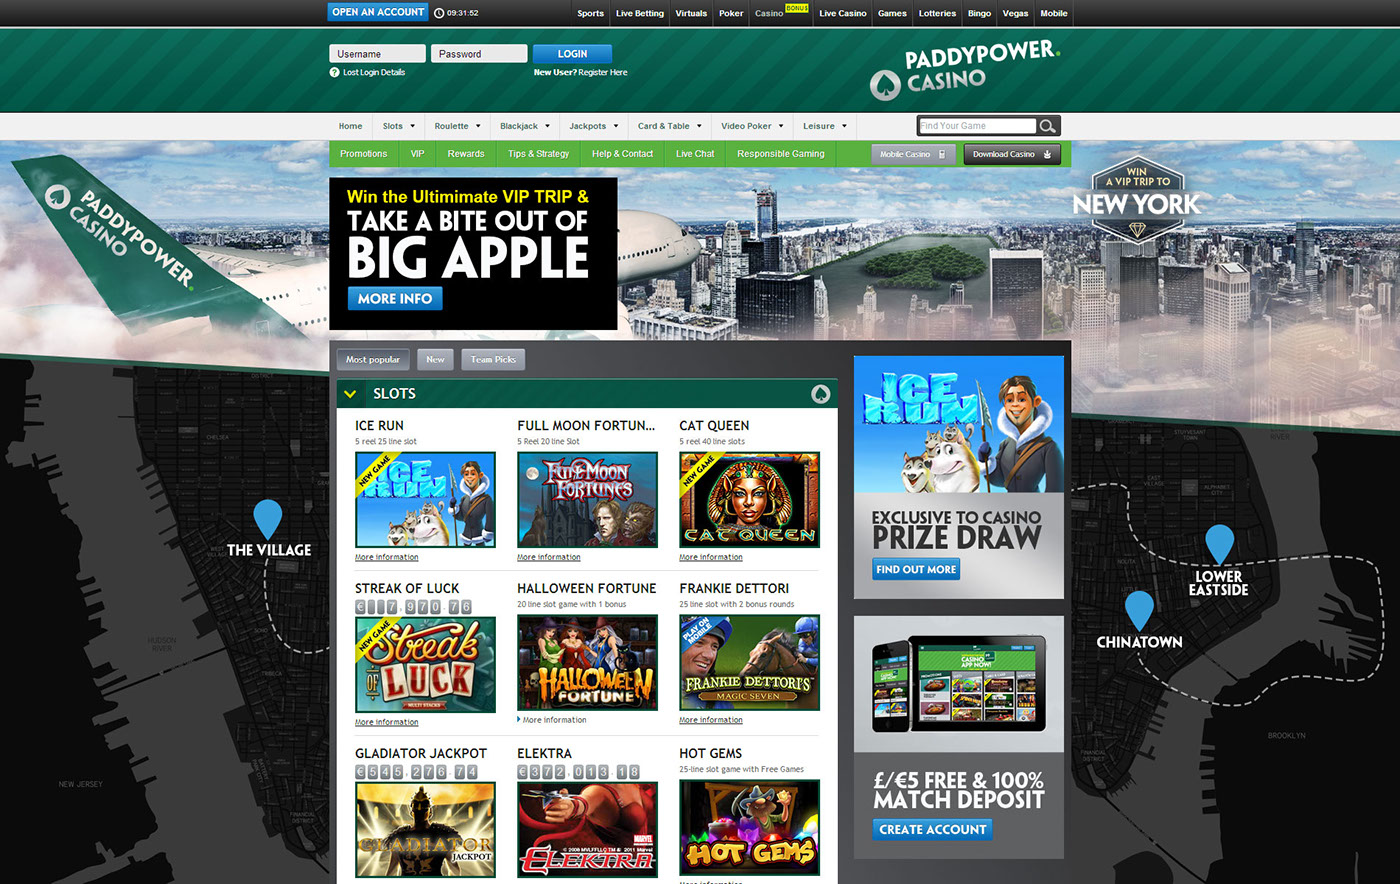 New York paddypower casino win a trip Promotion